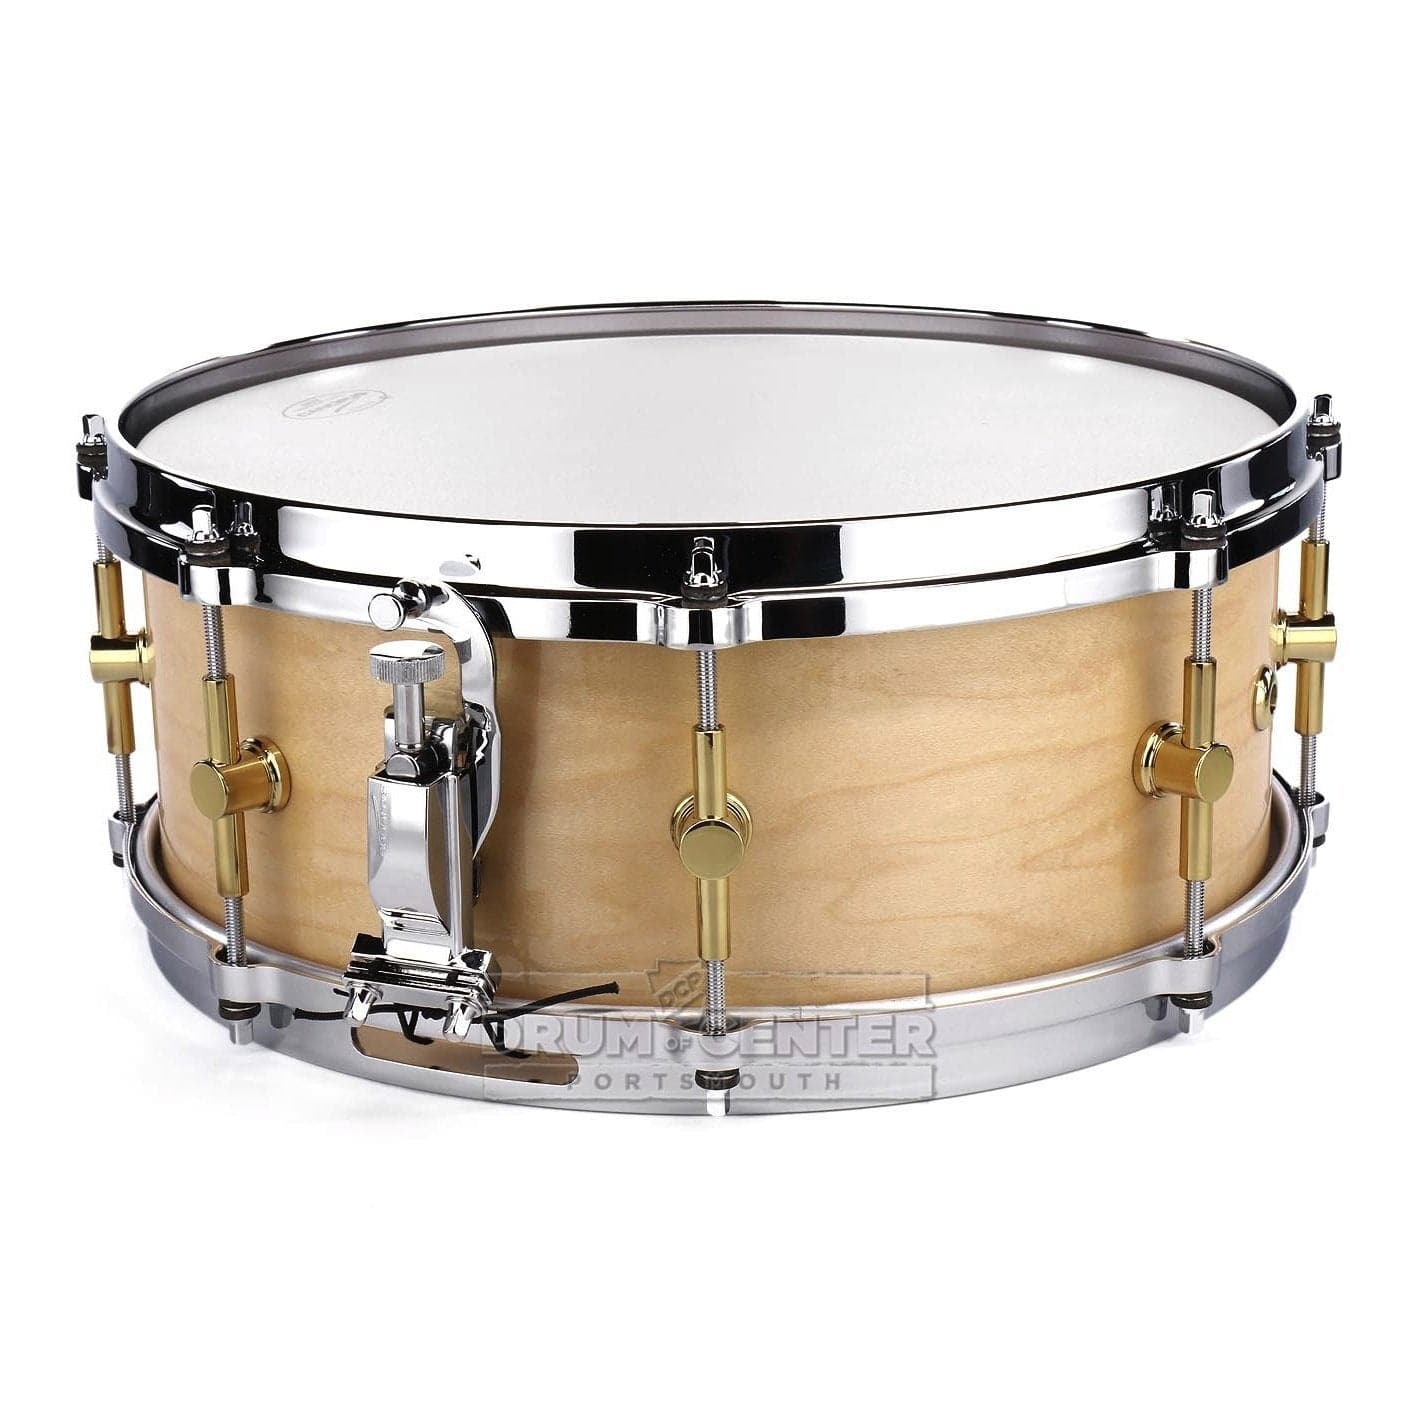 Canopus 'The Maple' Snare Drum 14x5.5 w/ Cast Hoops Natural